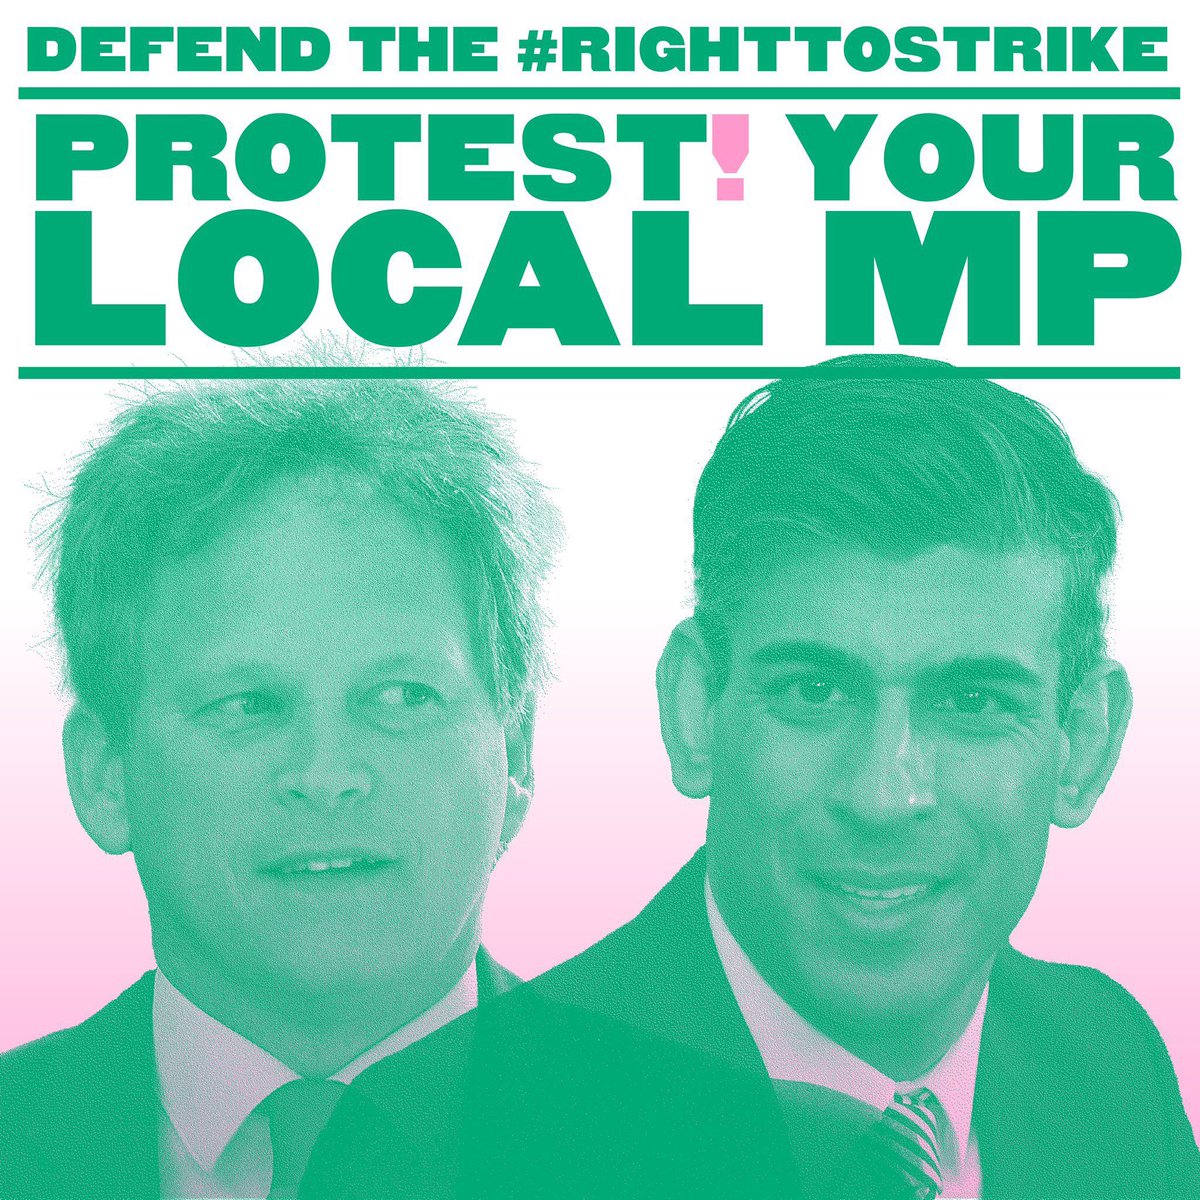 📢 PROTEST - Defend the Right to Strike! Join us tomorrow at 11am to protest outside the office of Tory MP, Richard Holden as we defend the right to strike in the face of the Tory anti-strike law. 11am at 25-27 Medomsley Road, Consett, DH8 5HE. #EnoughIsEnough #RightToStrike